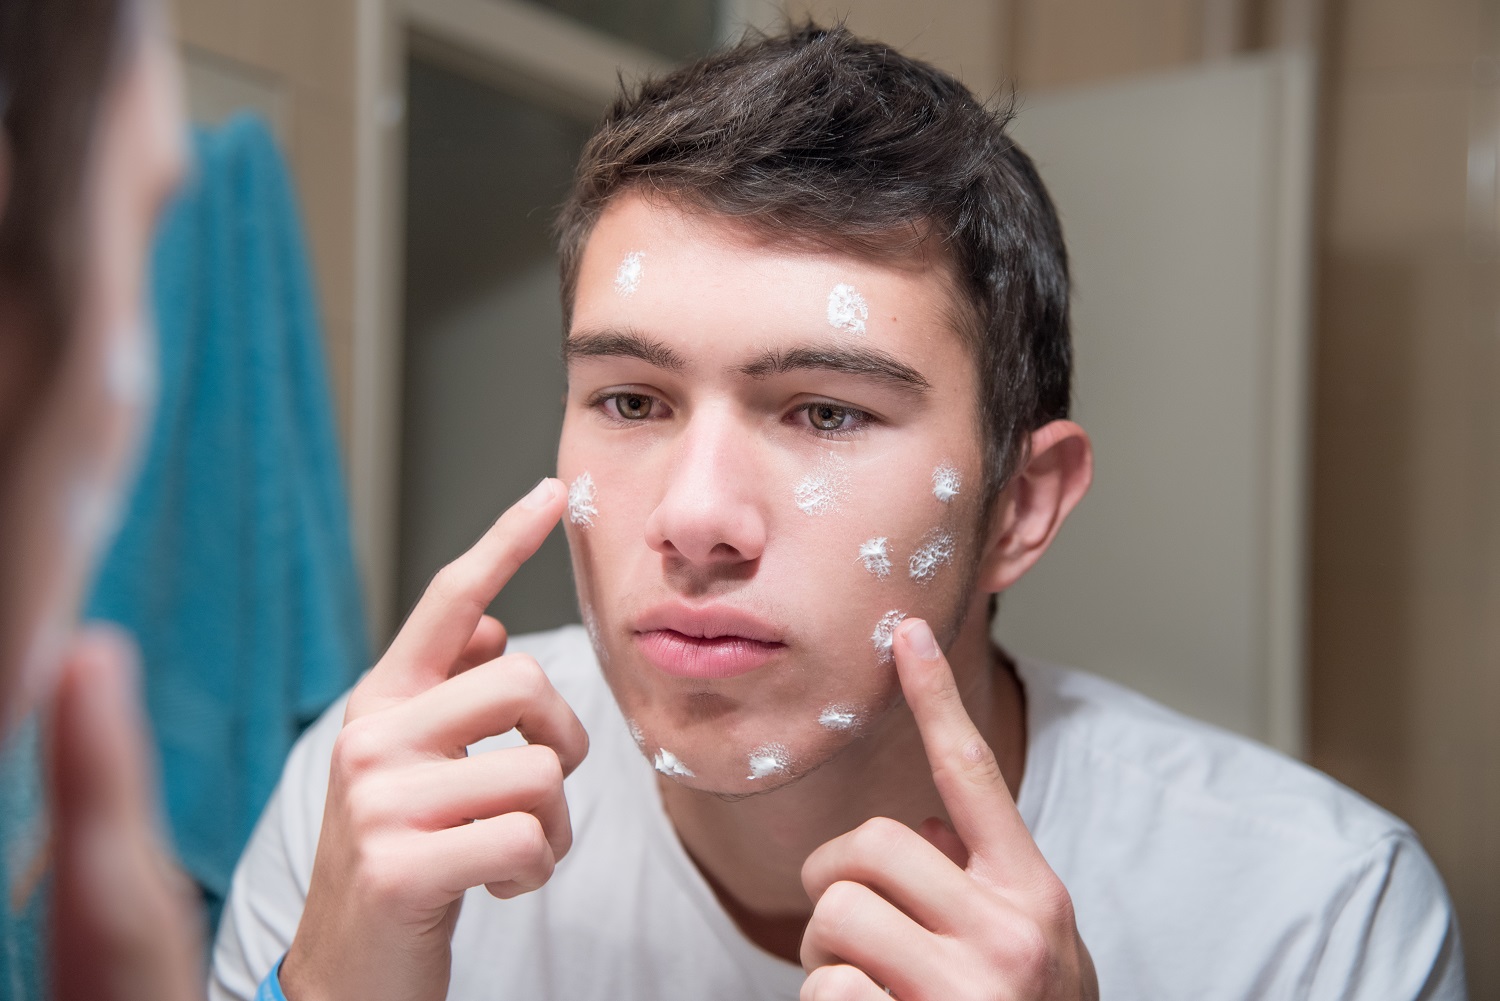 Facial pimples caused by shaving